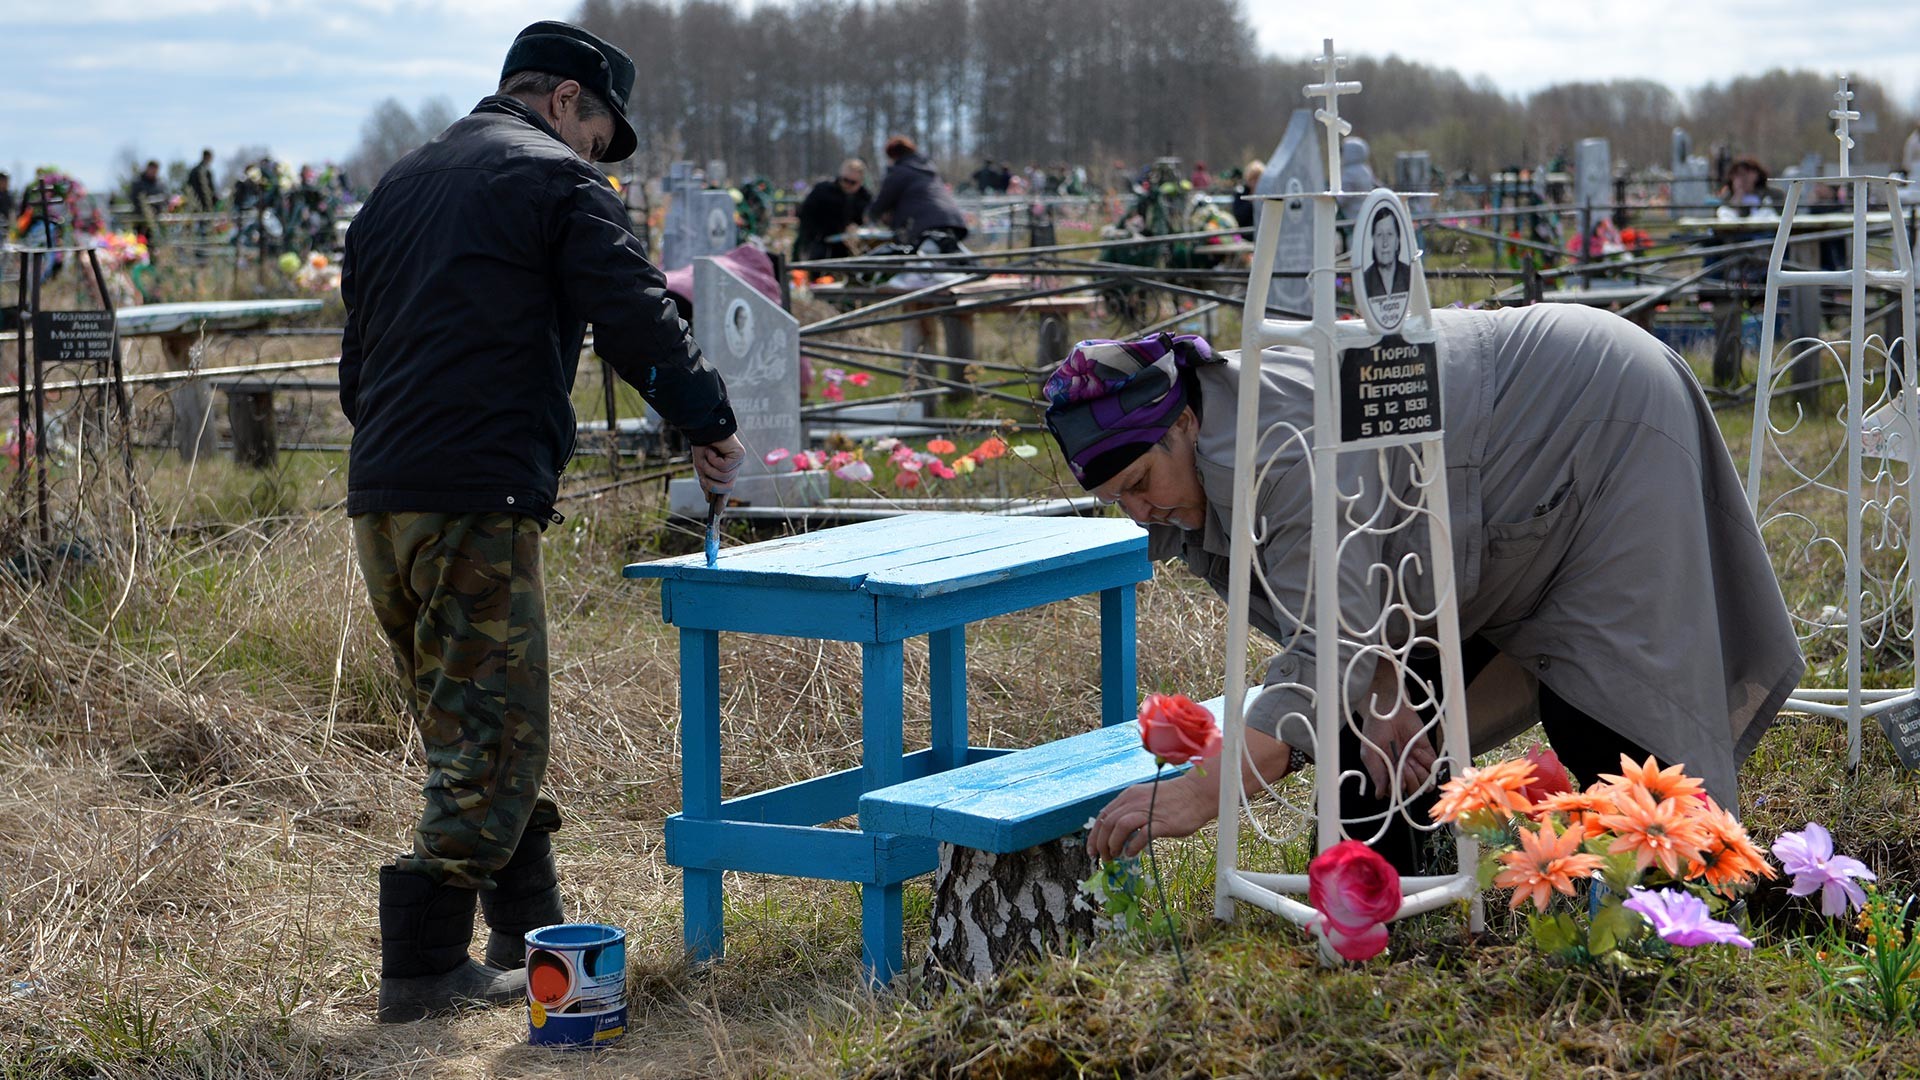 Russian people working in the cemetery in Omsk Oblast, Russia, during Radonitsa, a commemoration holiday.